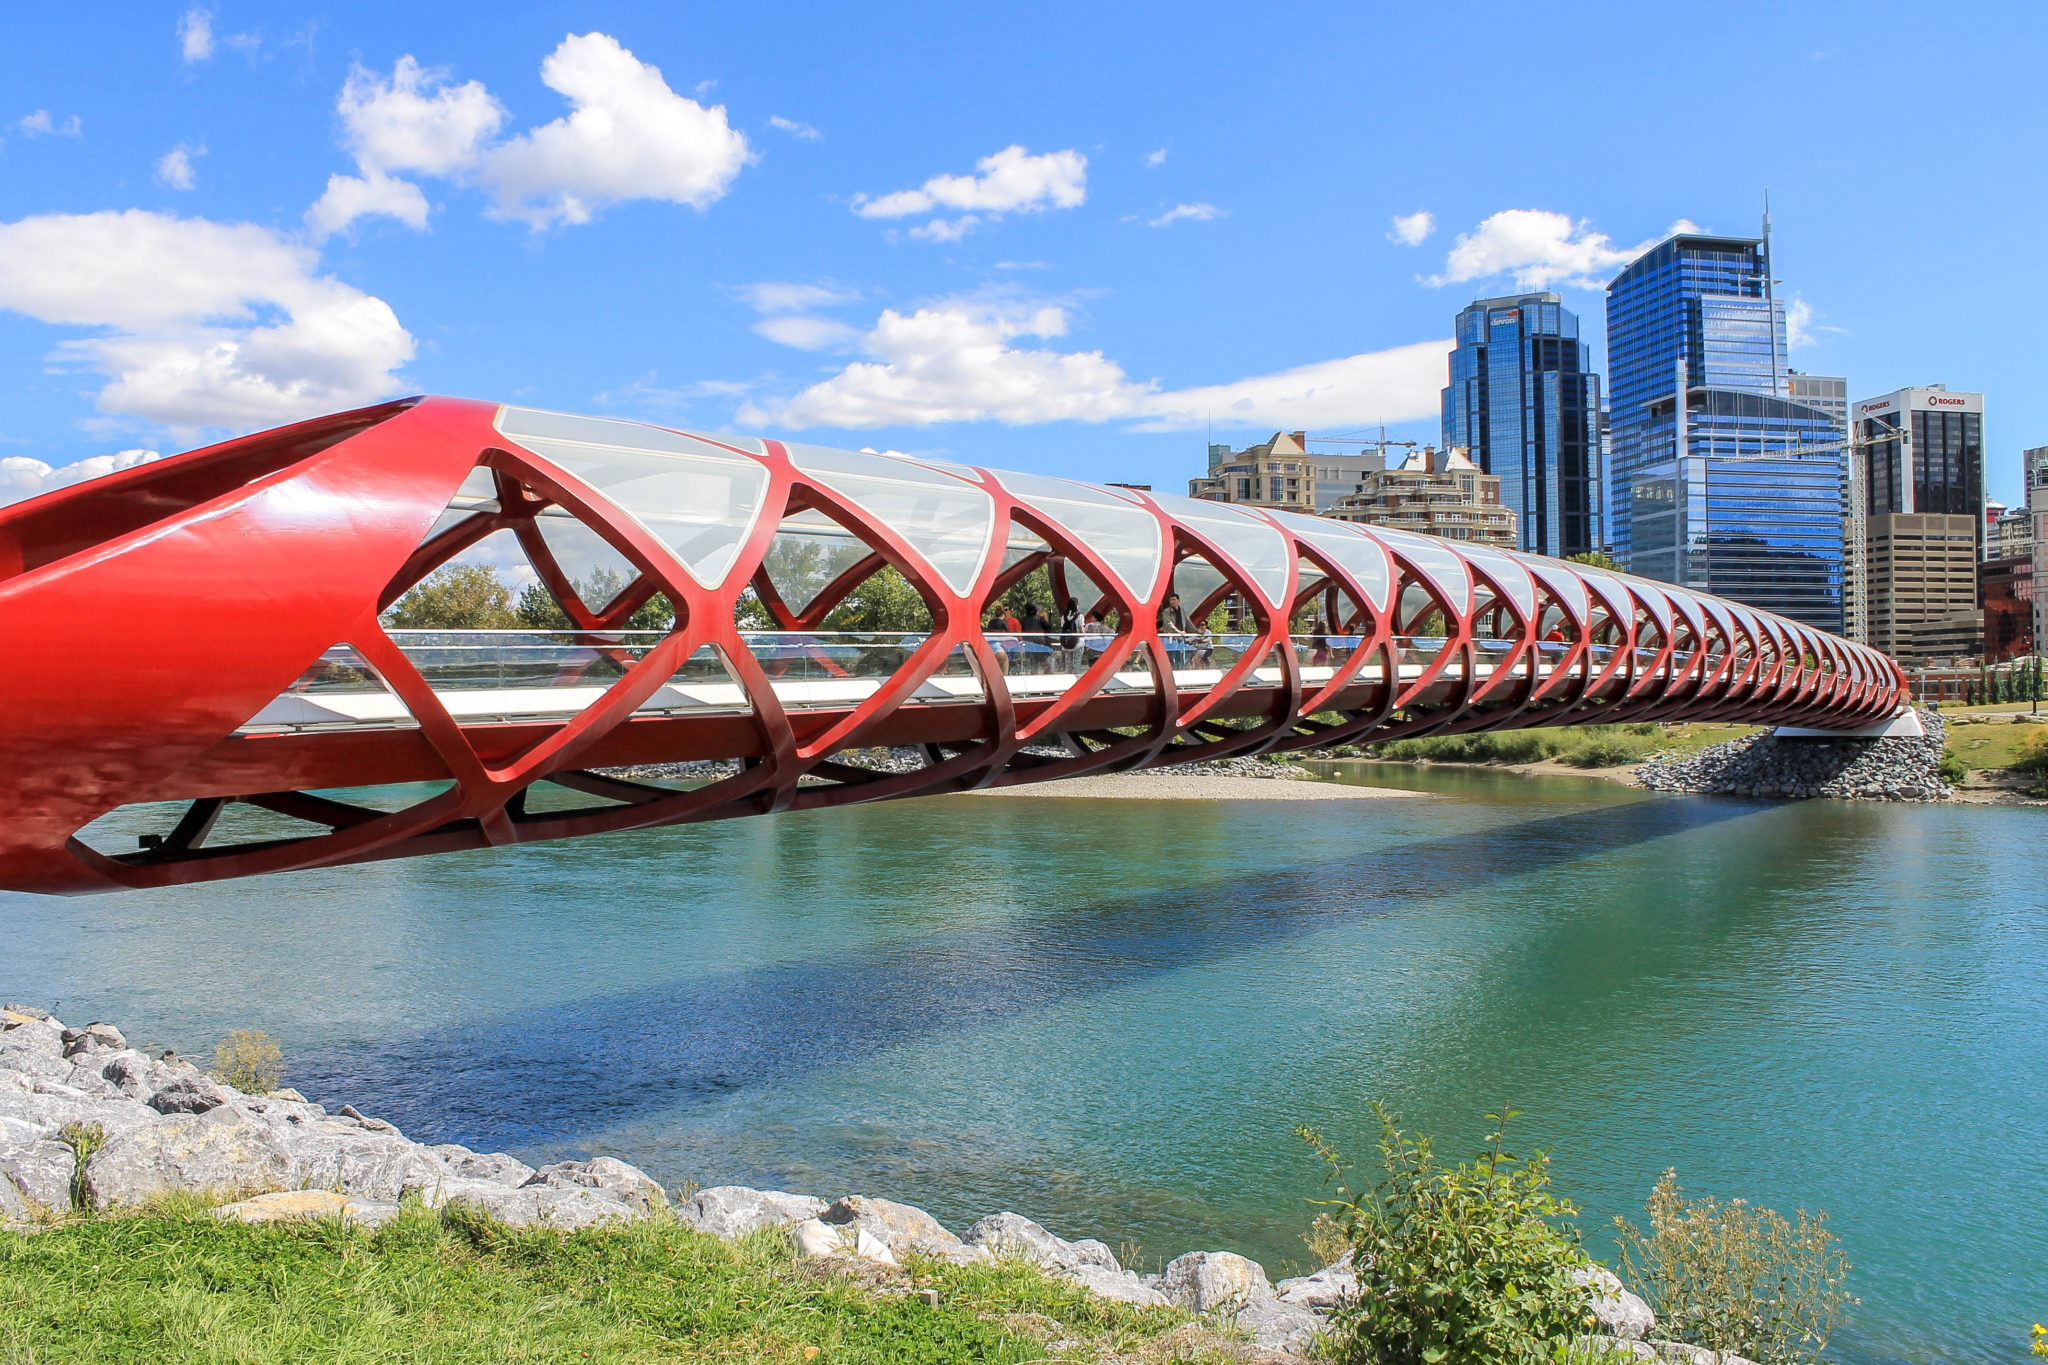 The Calgary Peace Bridge in downtown Calgary is one of the most iconic sights in the city and a top photography location.